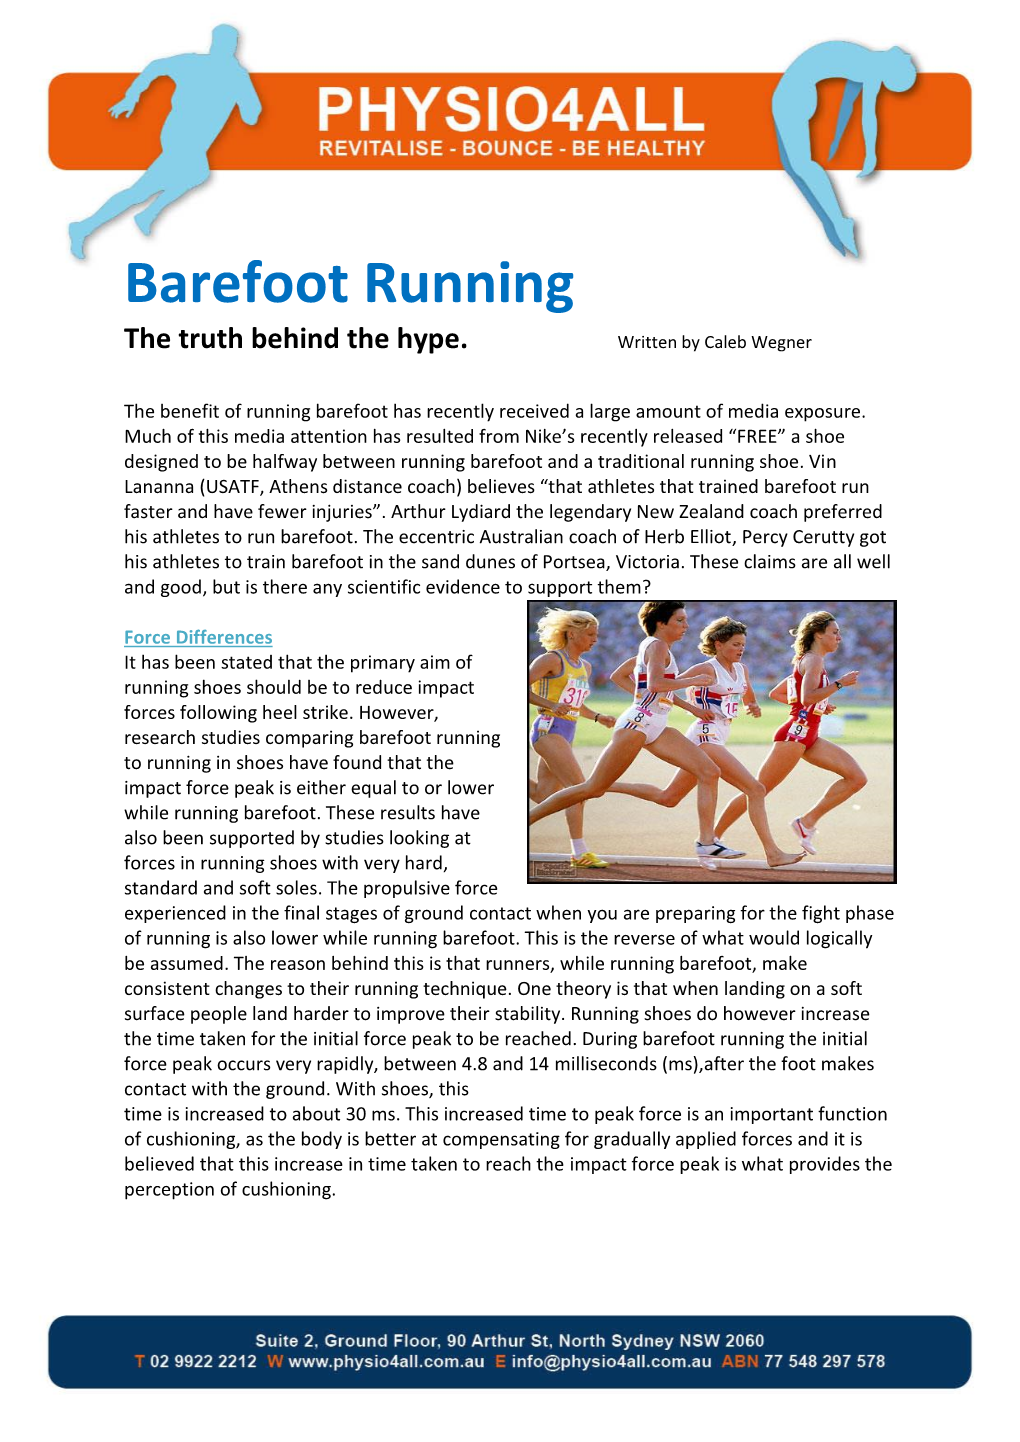 Barefoot Running the Truth Behind the Hype